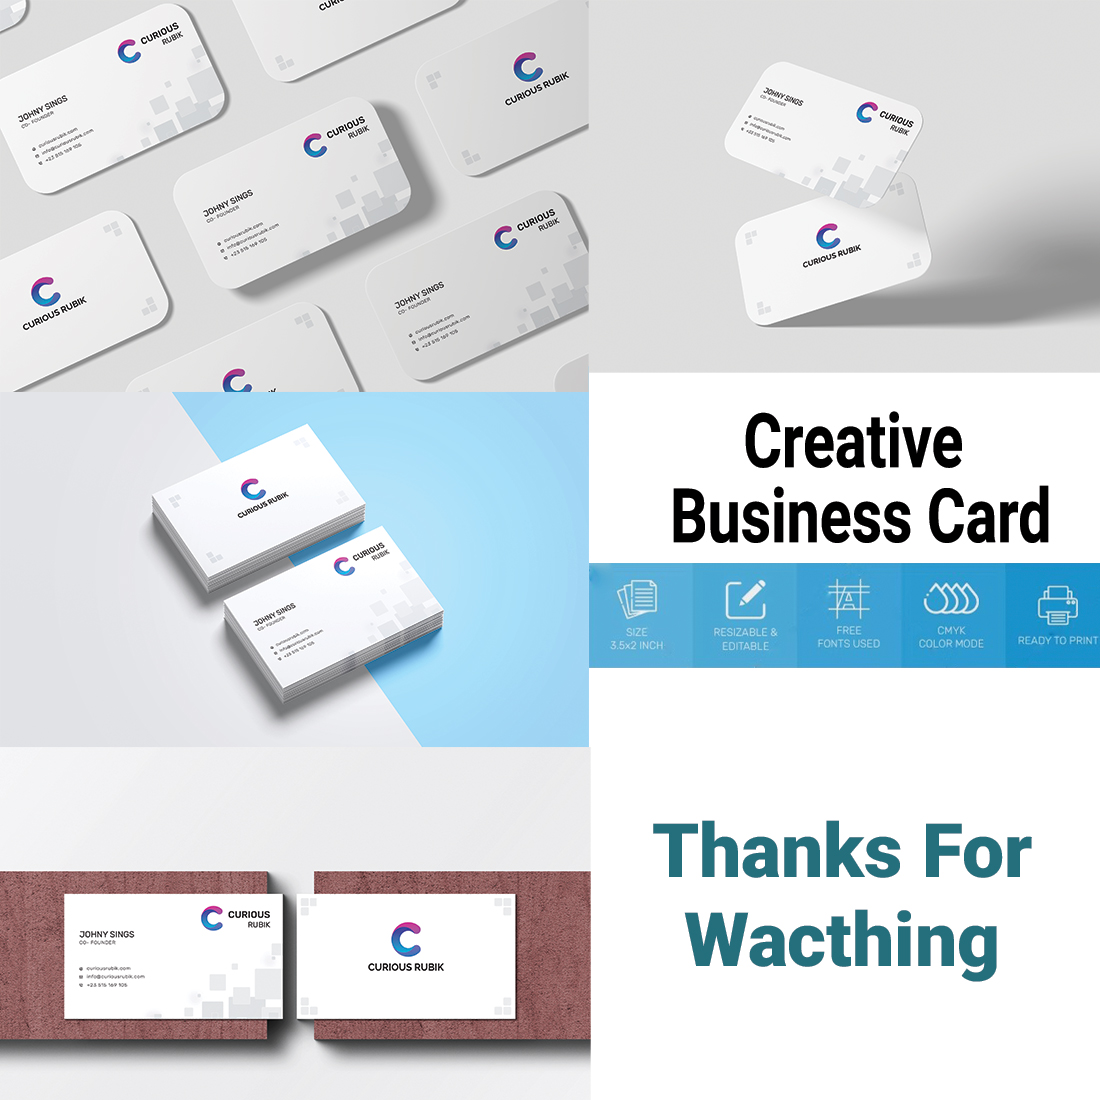 Creative Business Card cover image.